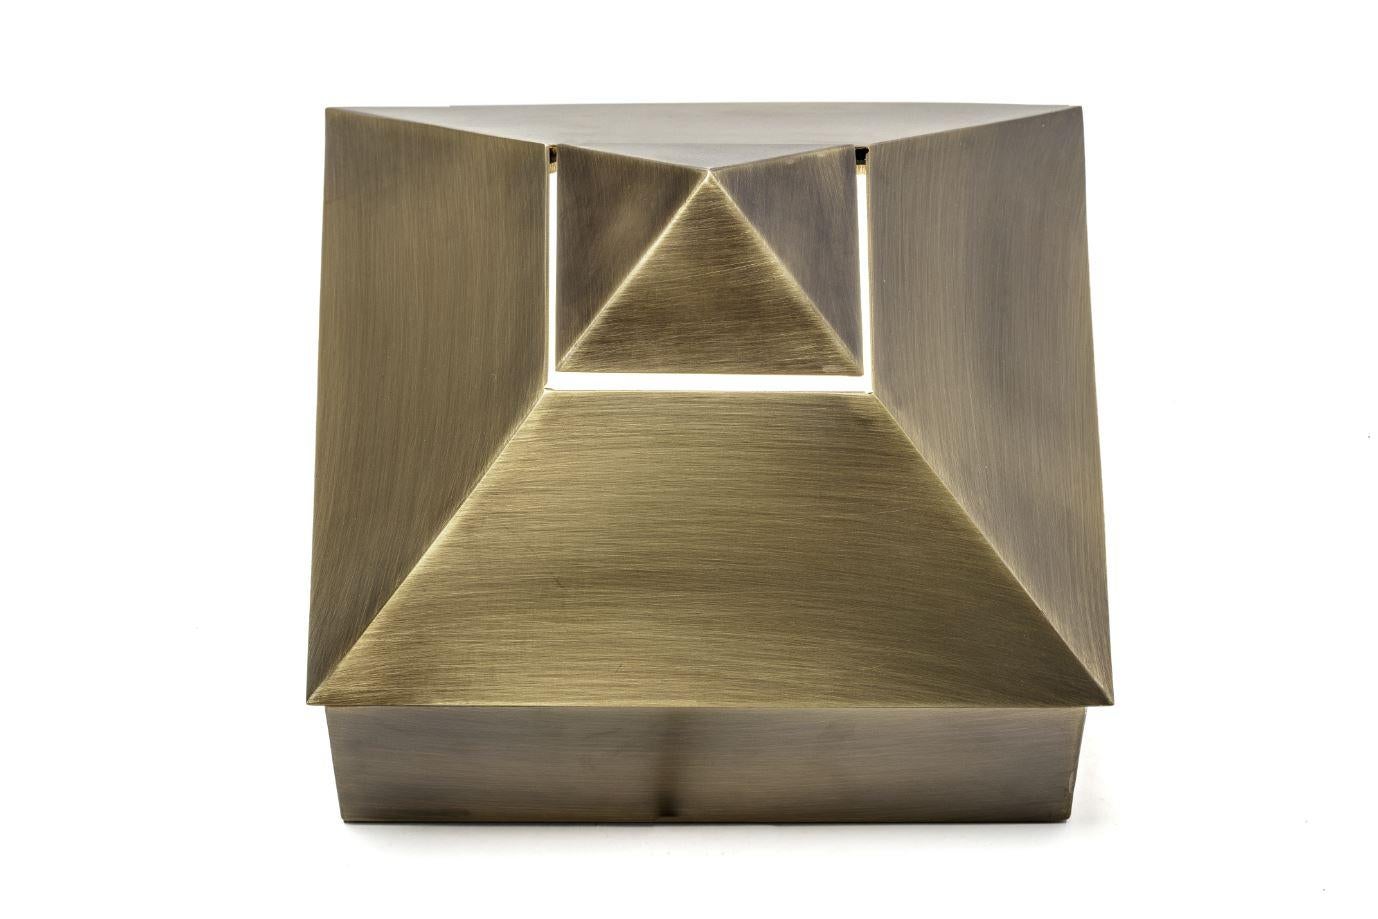 Stud Sconce, in Light Bronze Structure, Handcrafted in Portugal by Duistt

Stud is a modern and functional wall sconce that will add a touch of glamour and stylishness to any environment. Crafted with great attention to details throught a delightful